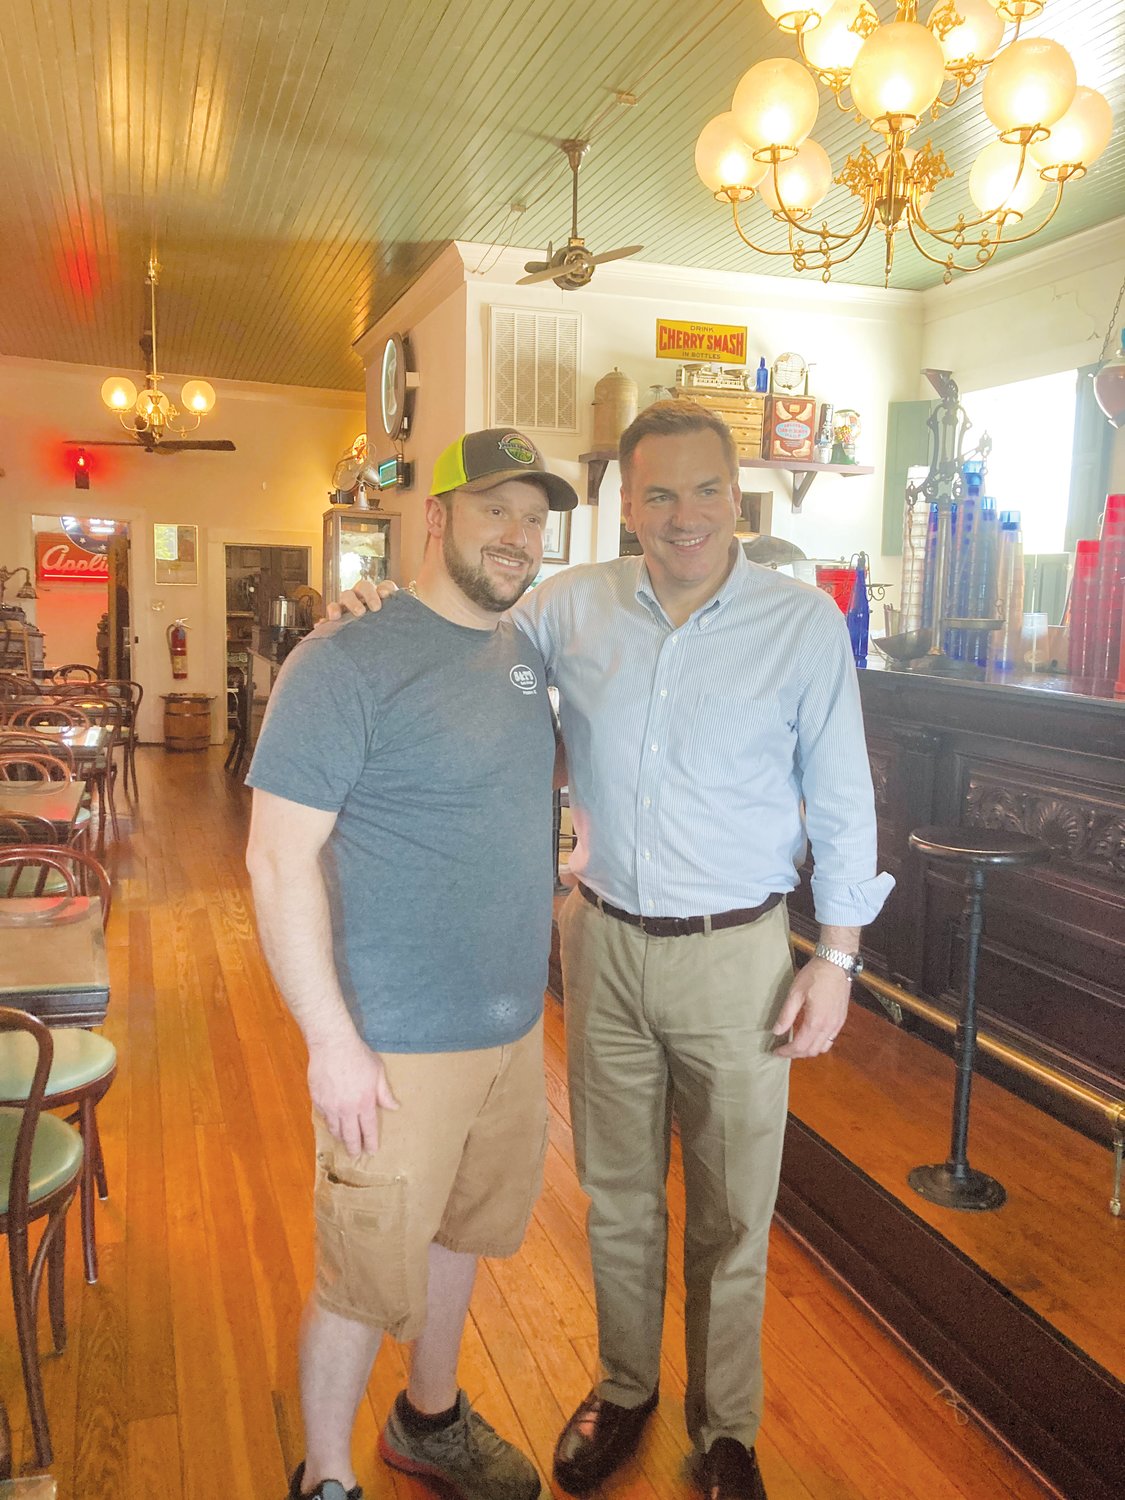 Congressman Richard Hudson Jr. (right) stands with S&T Soda Shoppe co-owner T.J. Oldham.